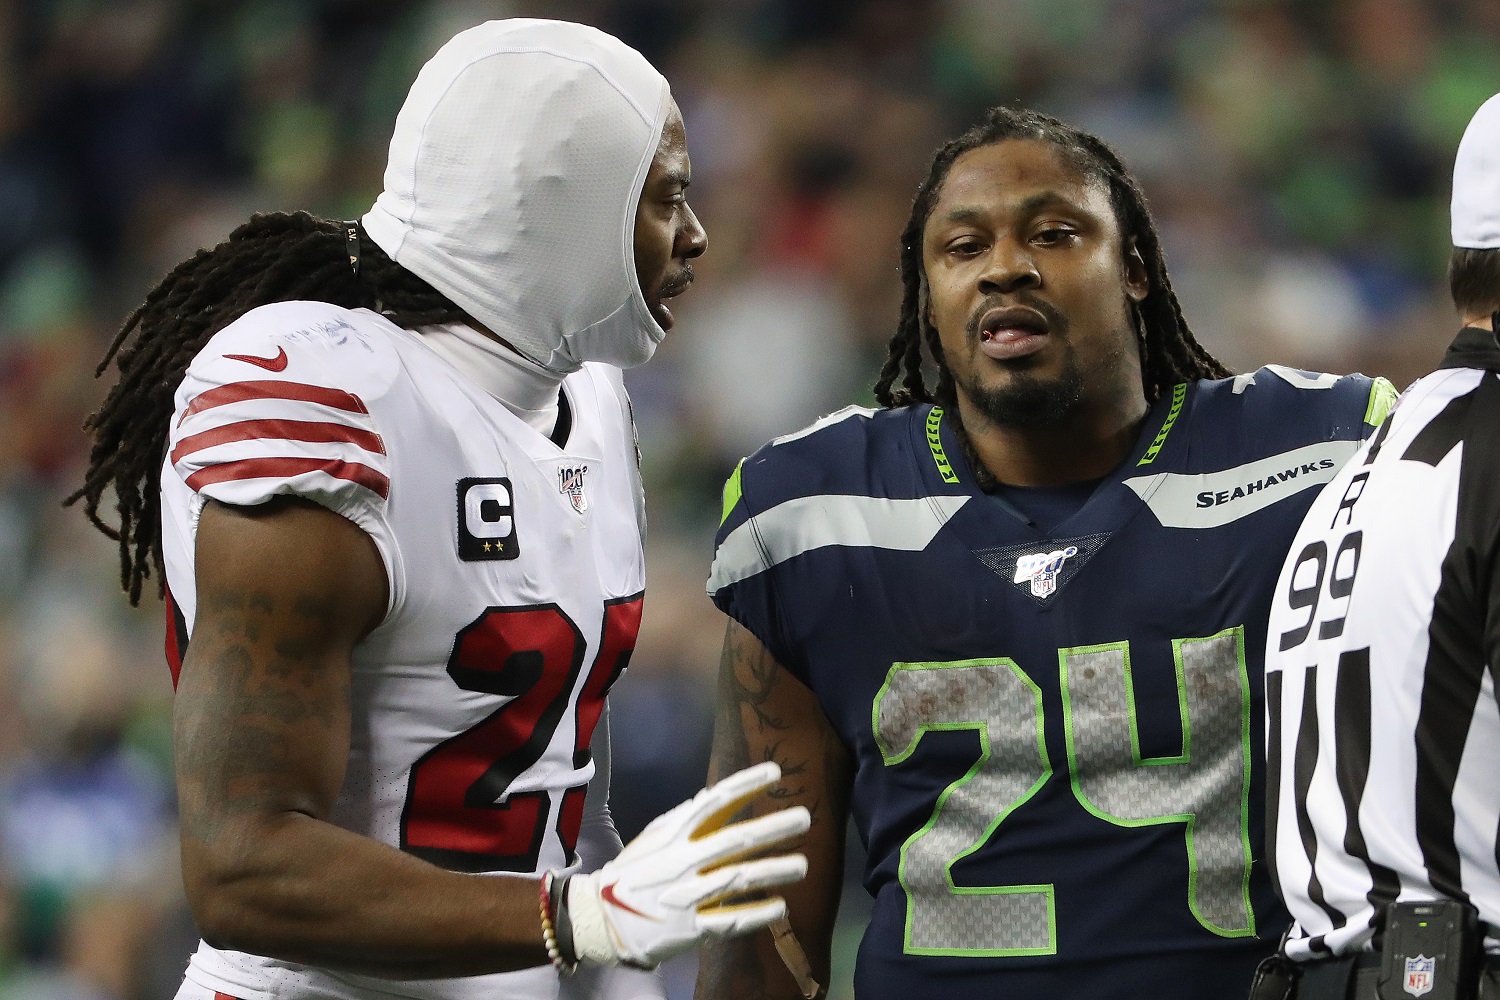 Richard Sherman of the San Francisco 49ers and Marshawn Lynch of the Seattle Seahawks talk during their game at CenturyLink Field on Dec. 29, 2019 in Seattle, Washington. | Abbie Parr/Getty Images